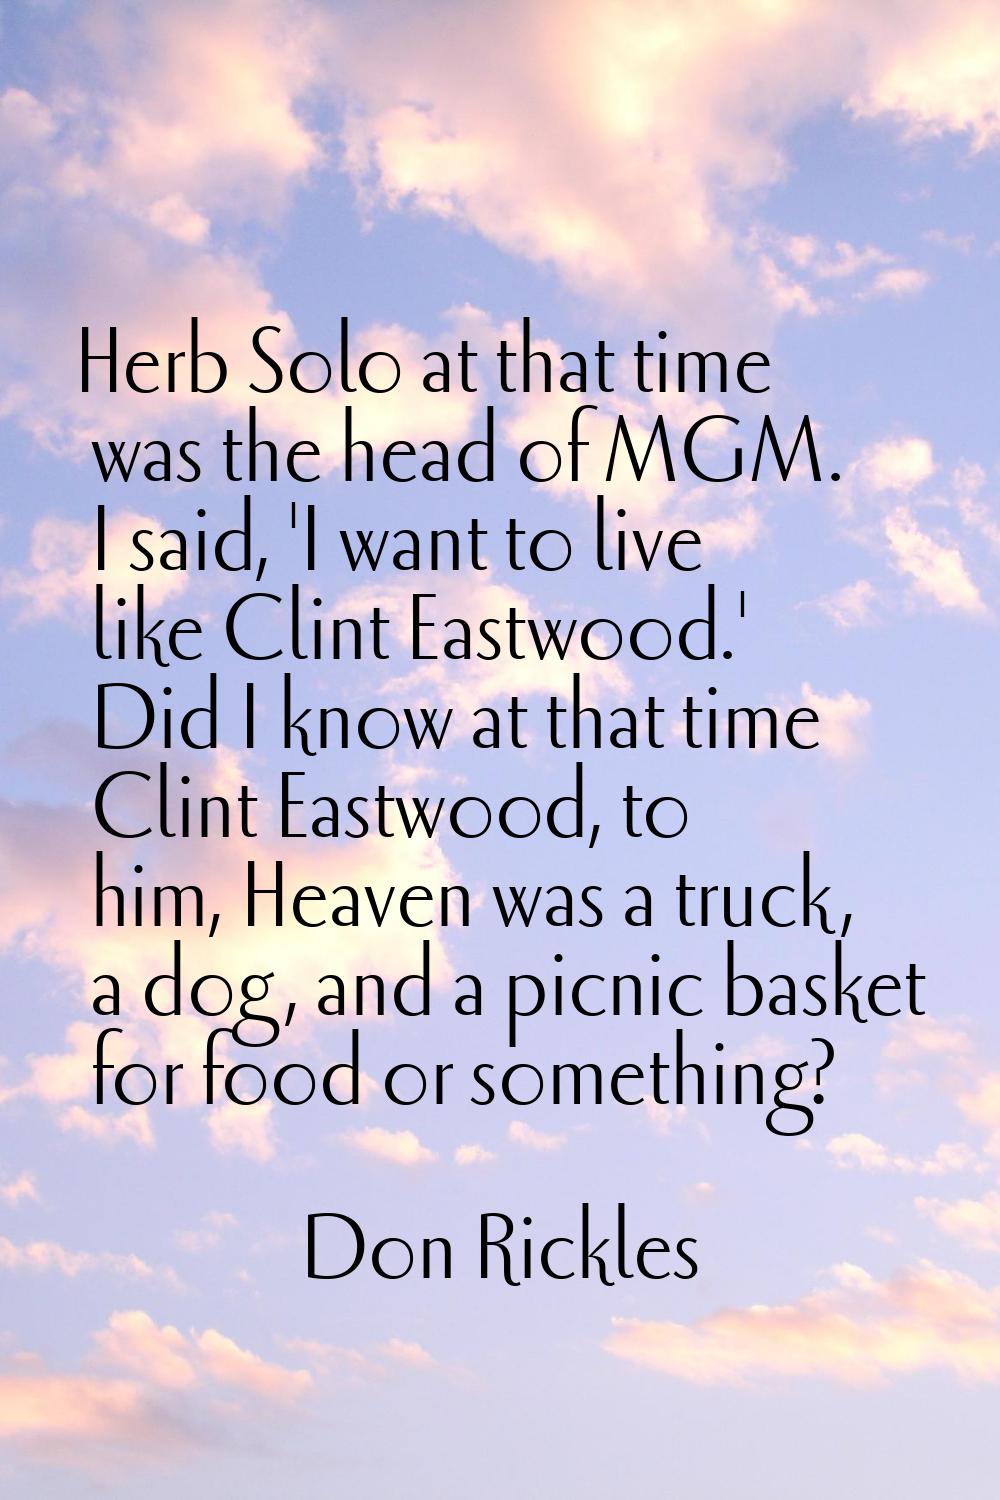 Herb Solo at that time was the head of MGM. I said, 'I want to live like Clint Eastwood.' Did I kno